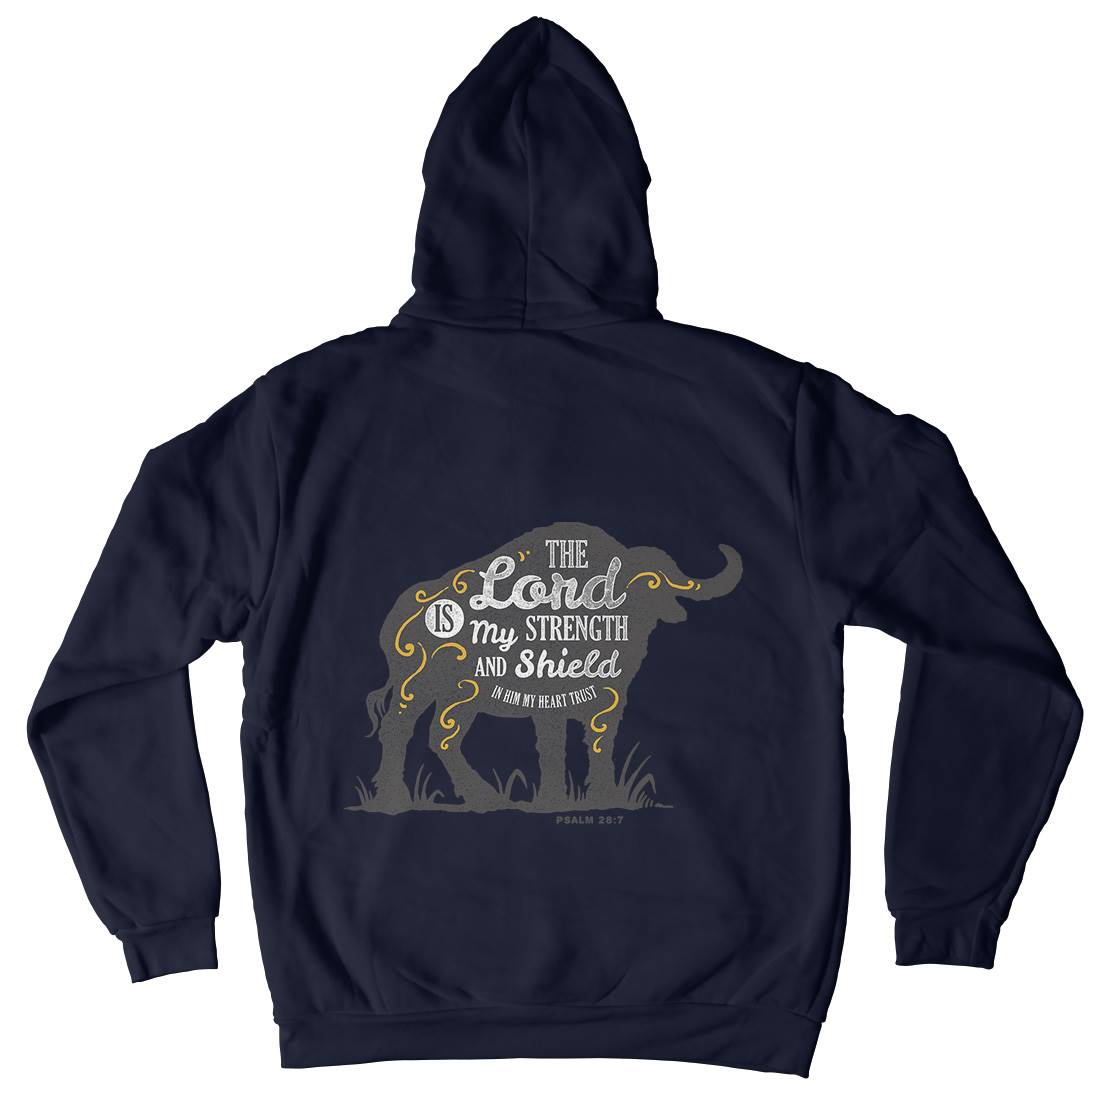 Lord Is My Strength Kids Crew Neck Hoodie Religion A383